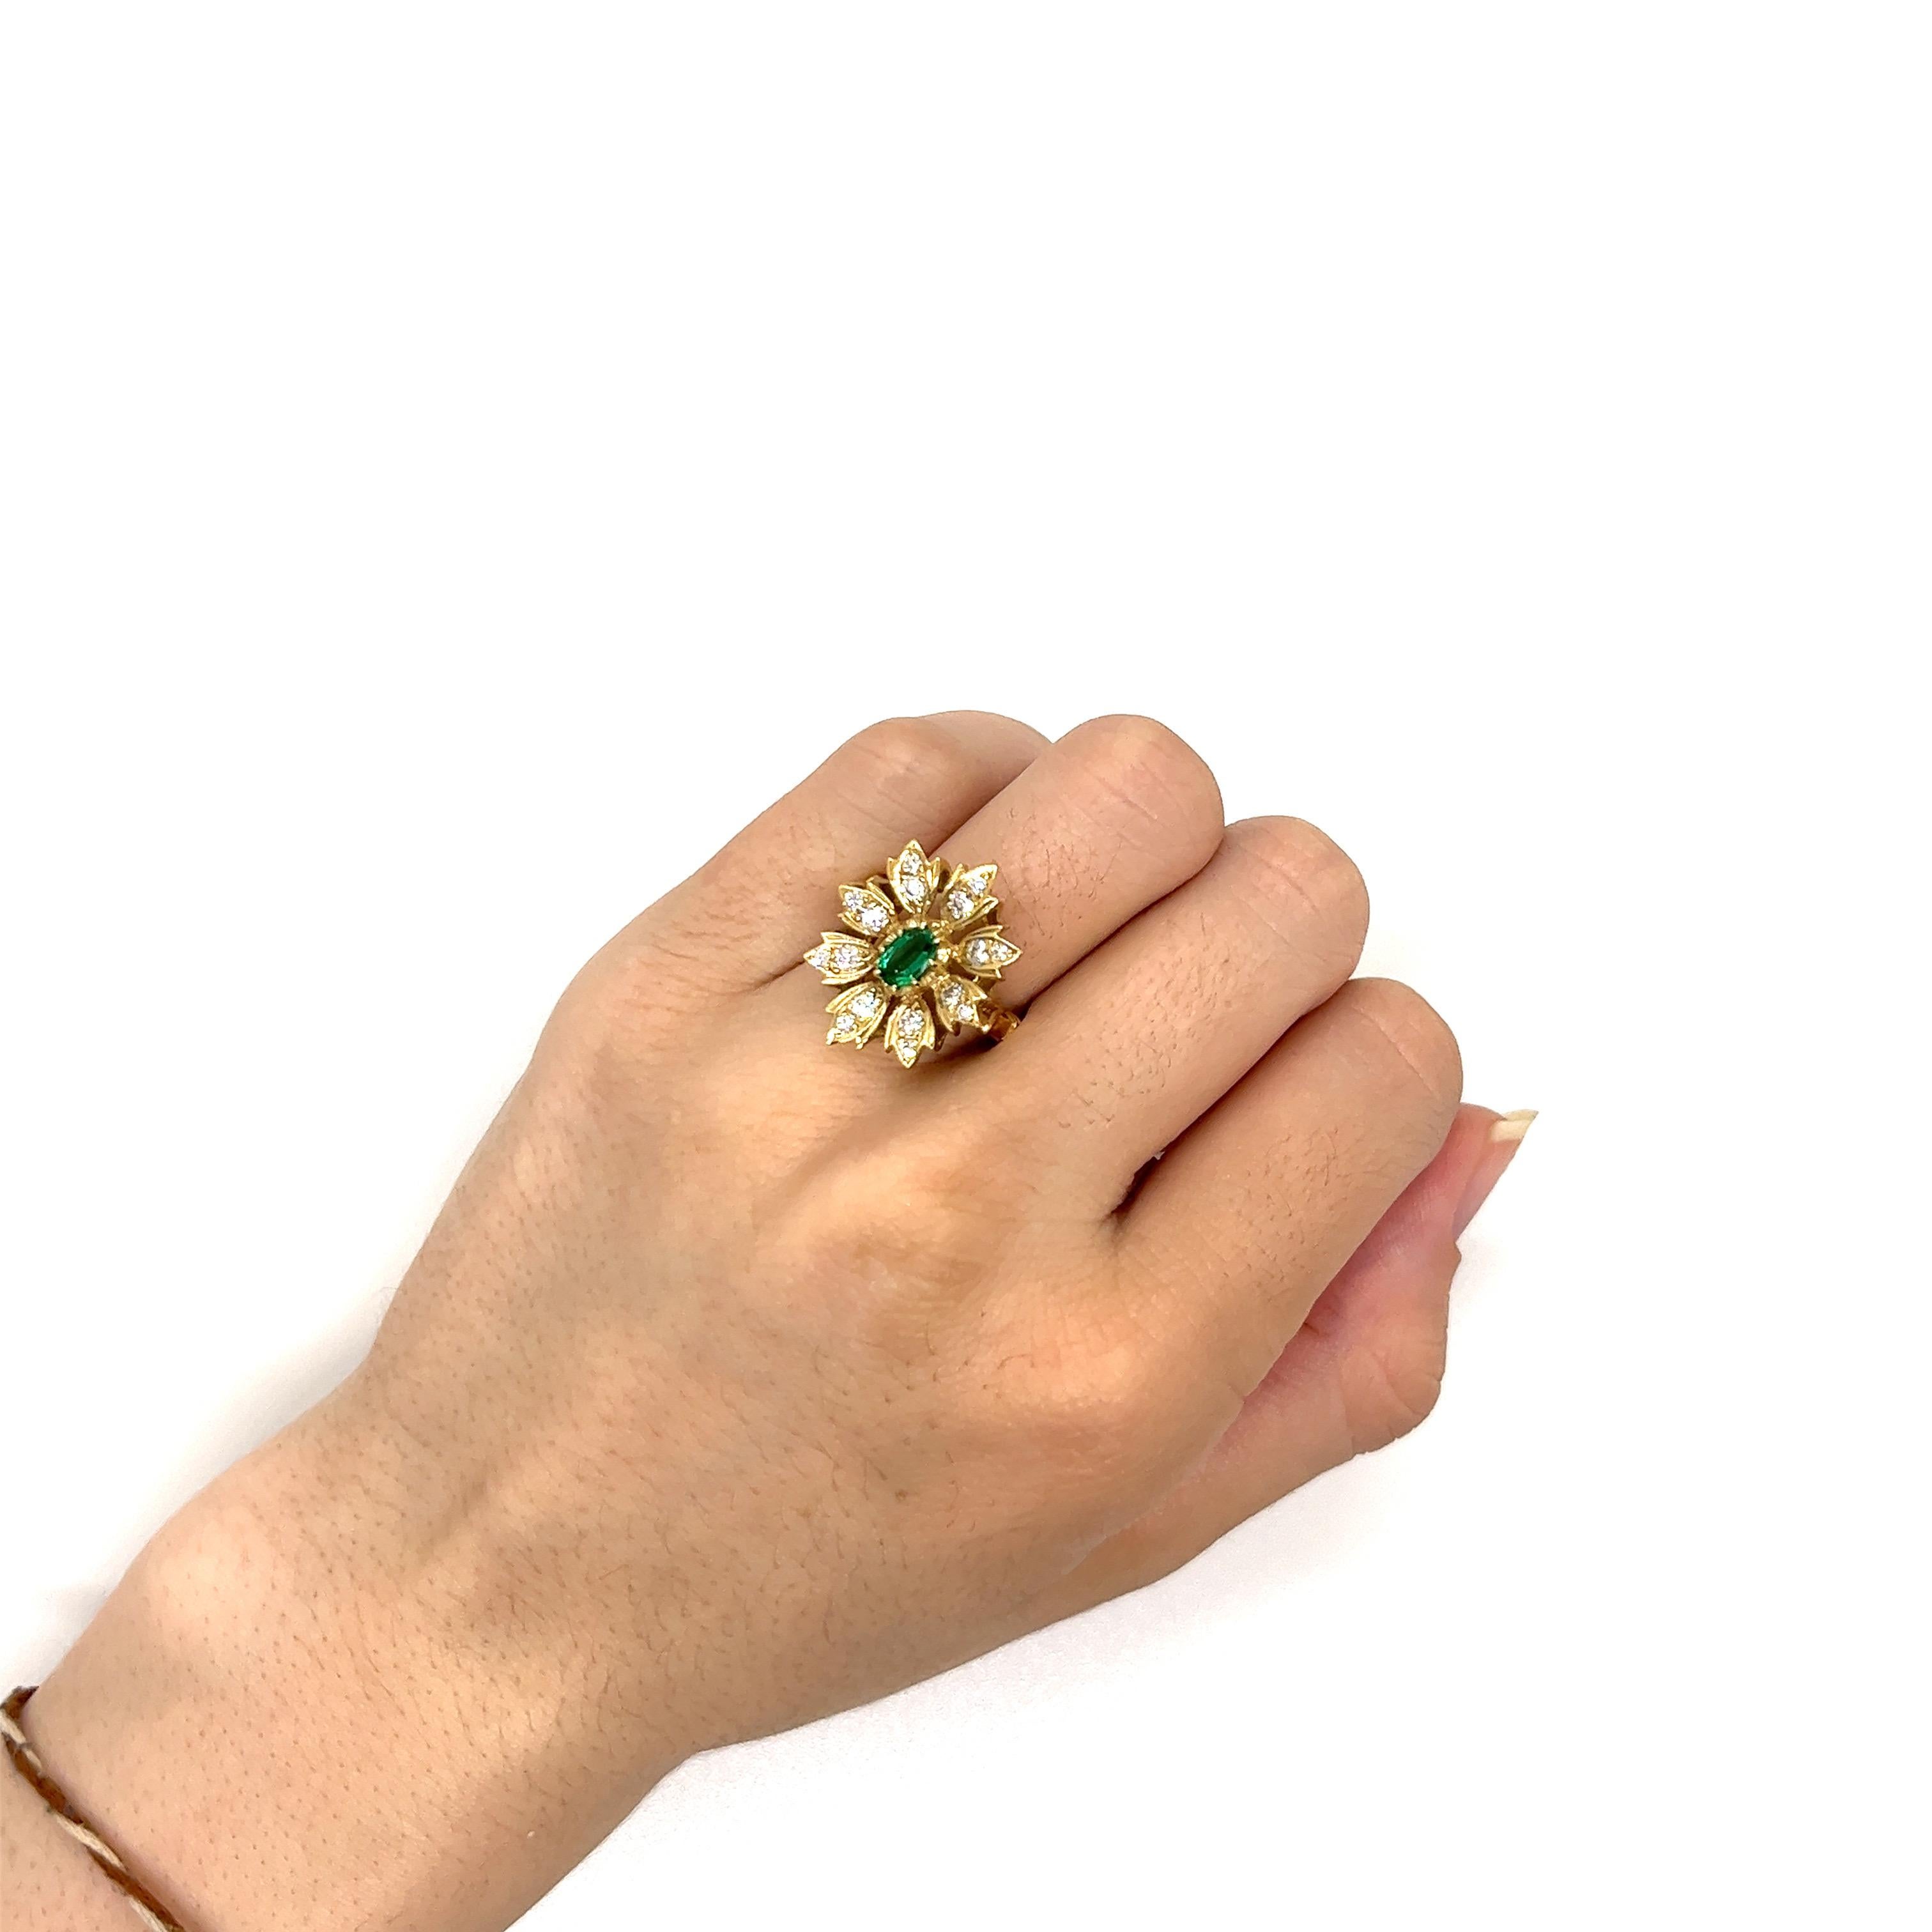 Vintage 14k yellow gold Victorian Reproduction Emerald and Diamond Ring For Sale 3